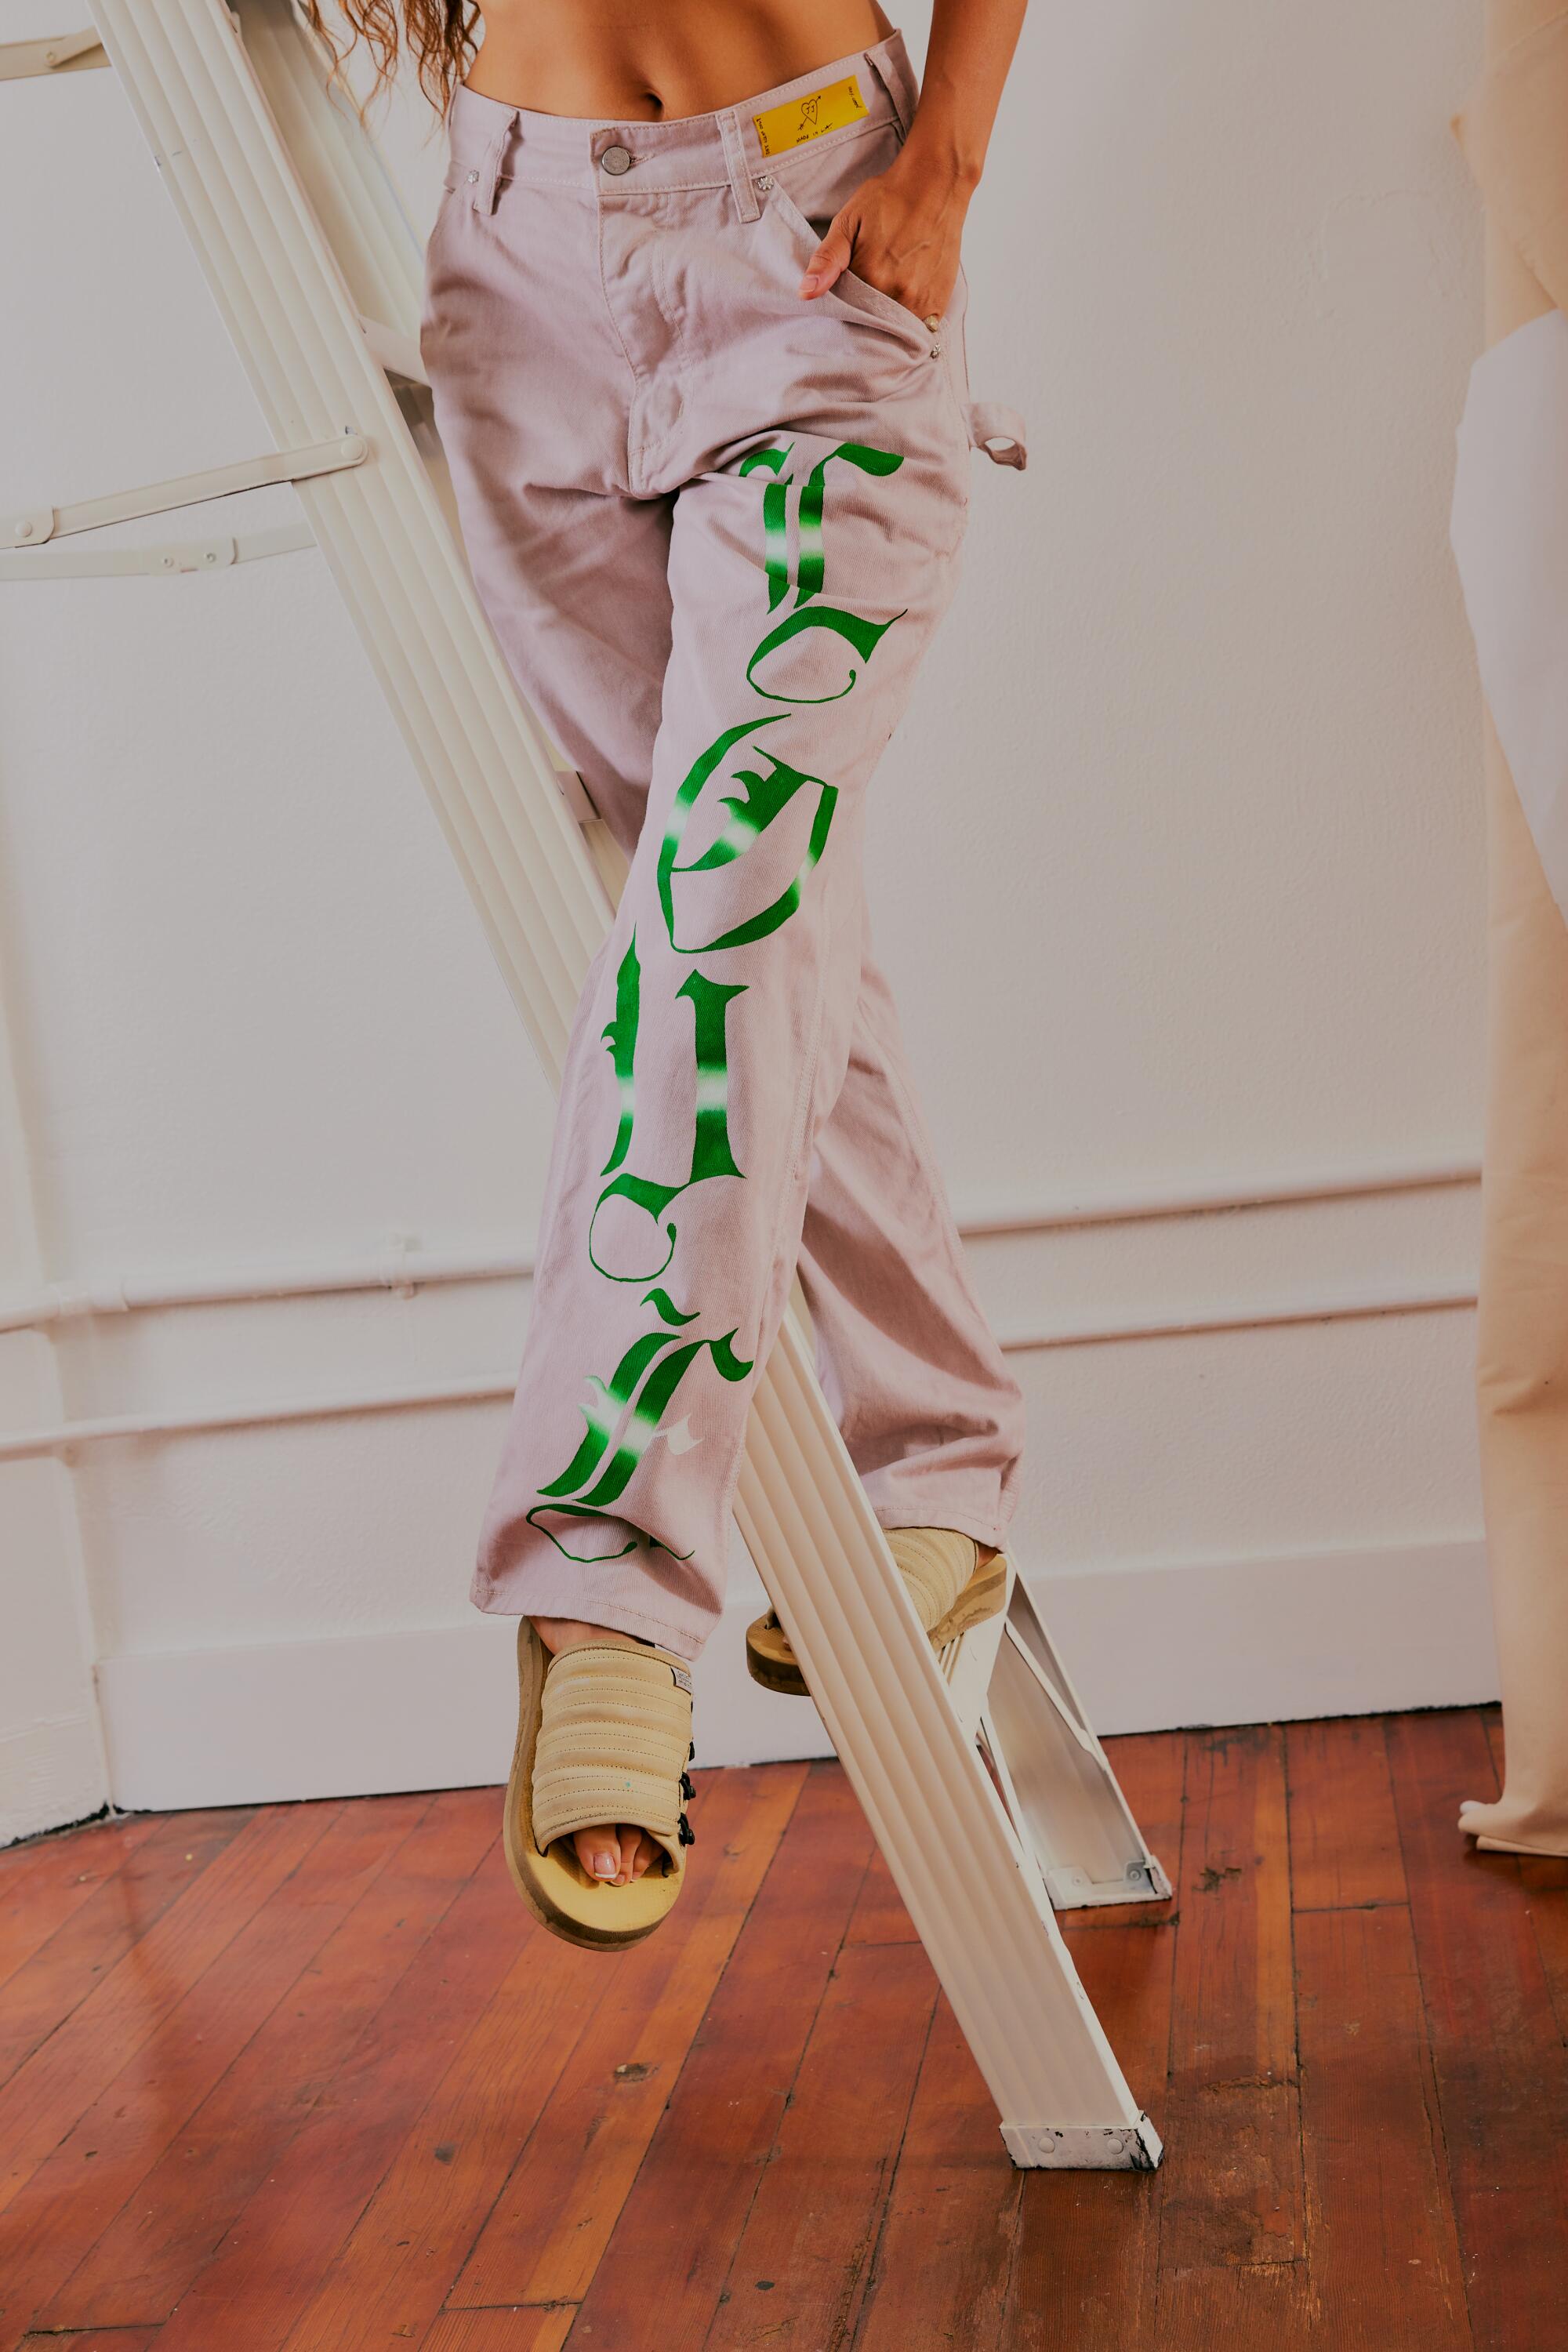 An image of a woman on a ladder, showing her pants painted in gothic fonts.